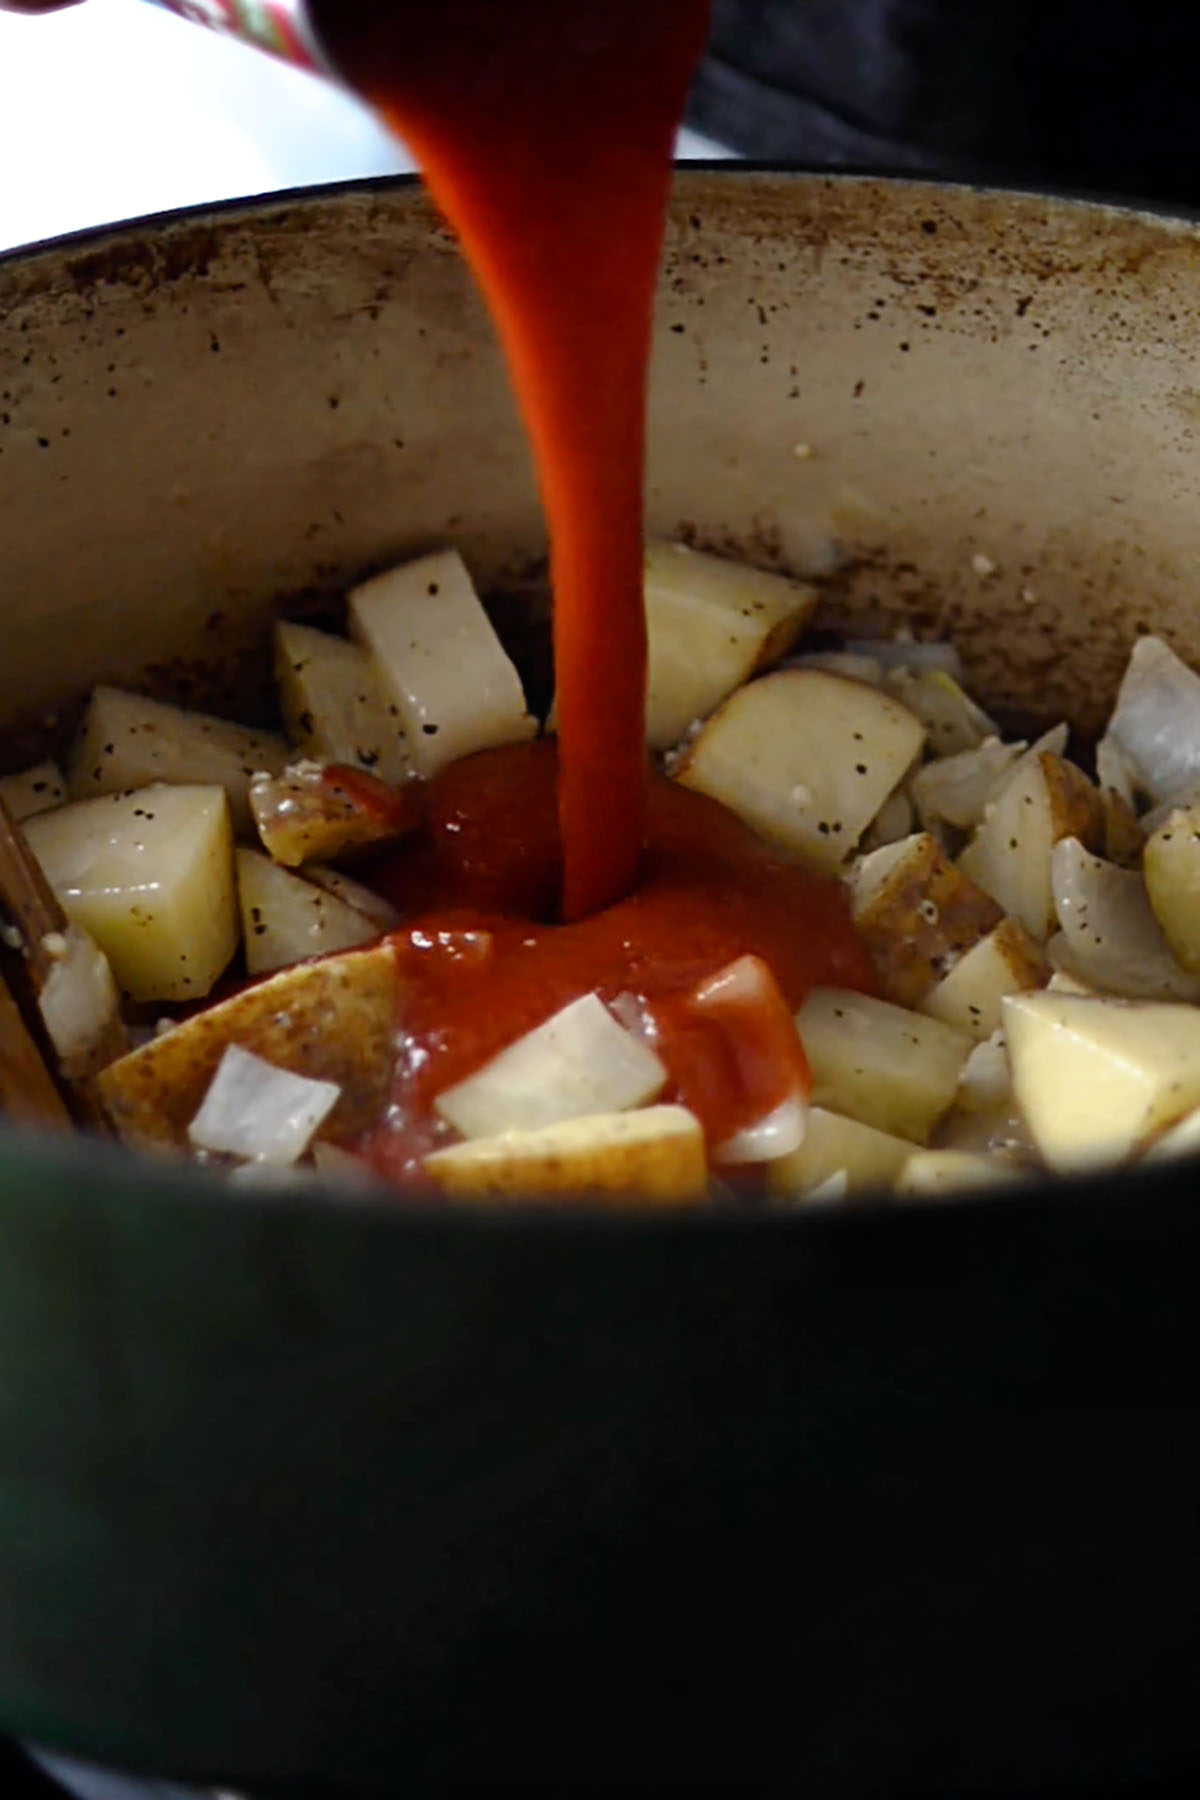 Tomato sauce being added to potatoes in a cast iron dutch oven.